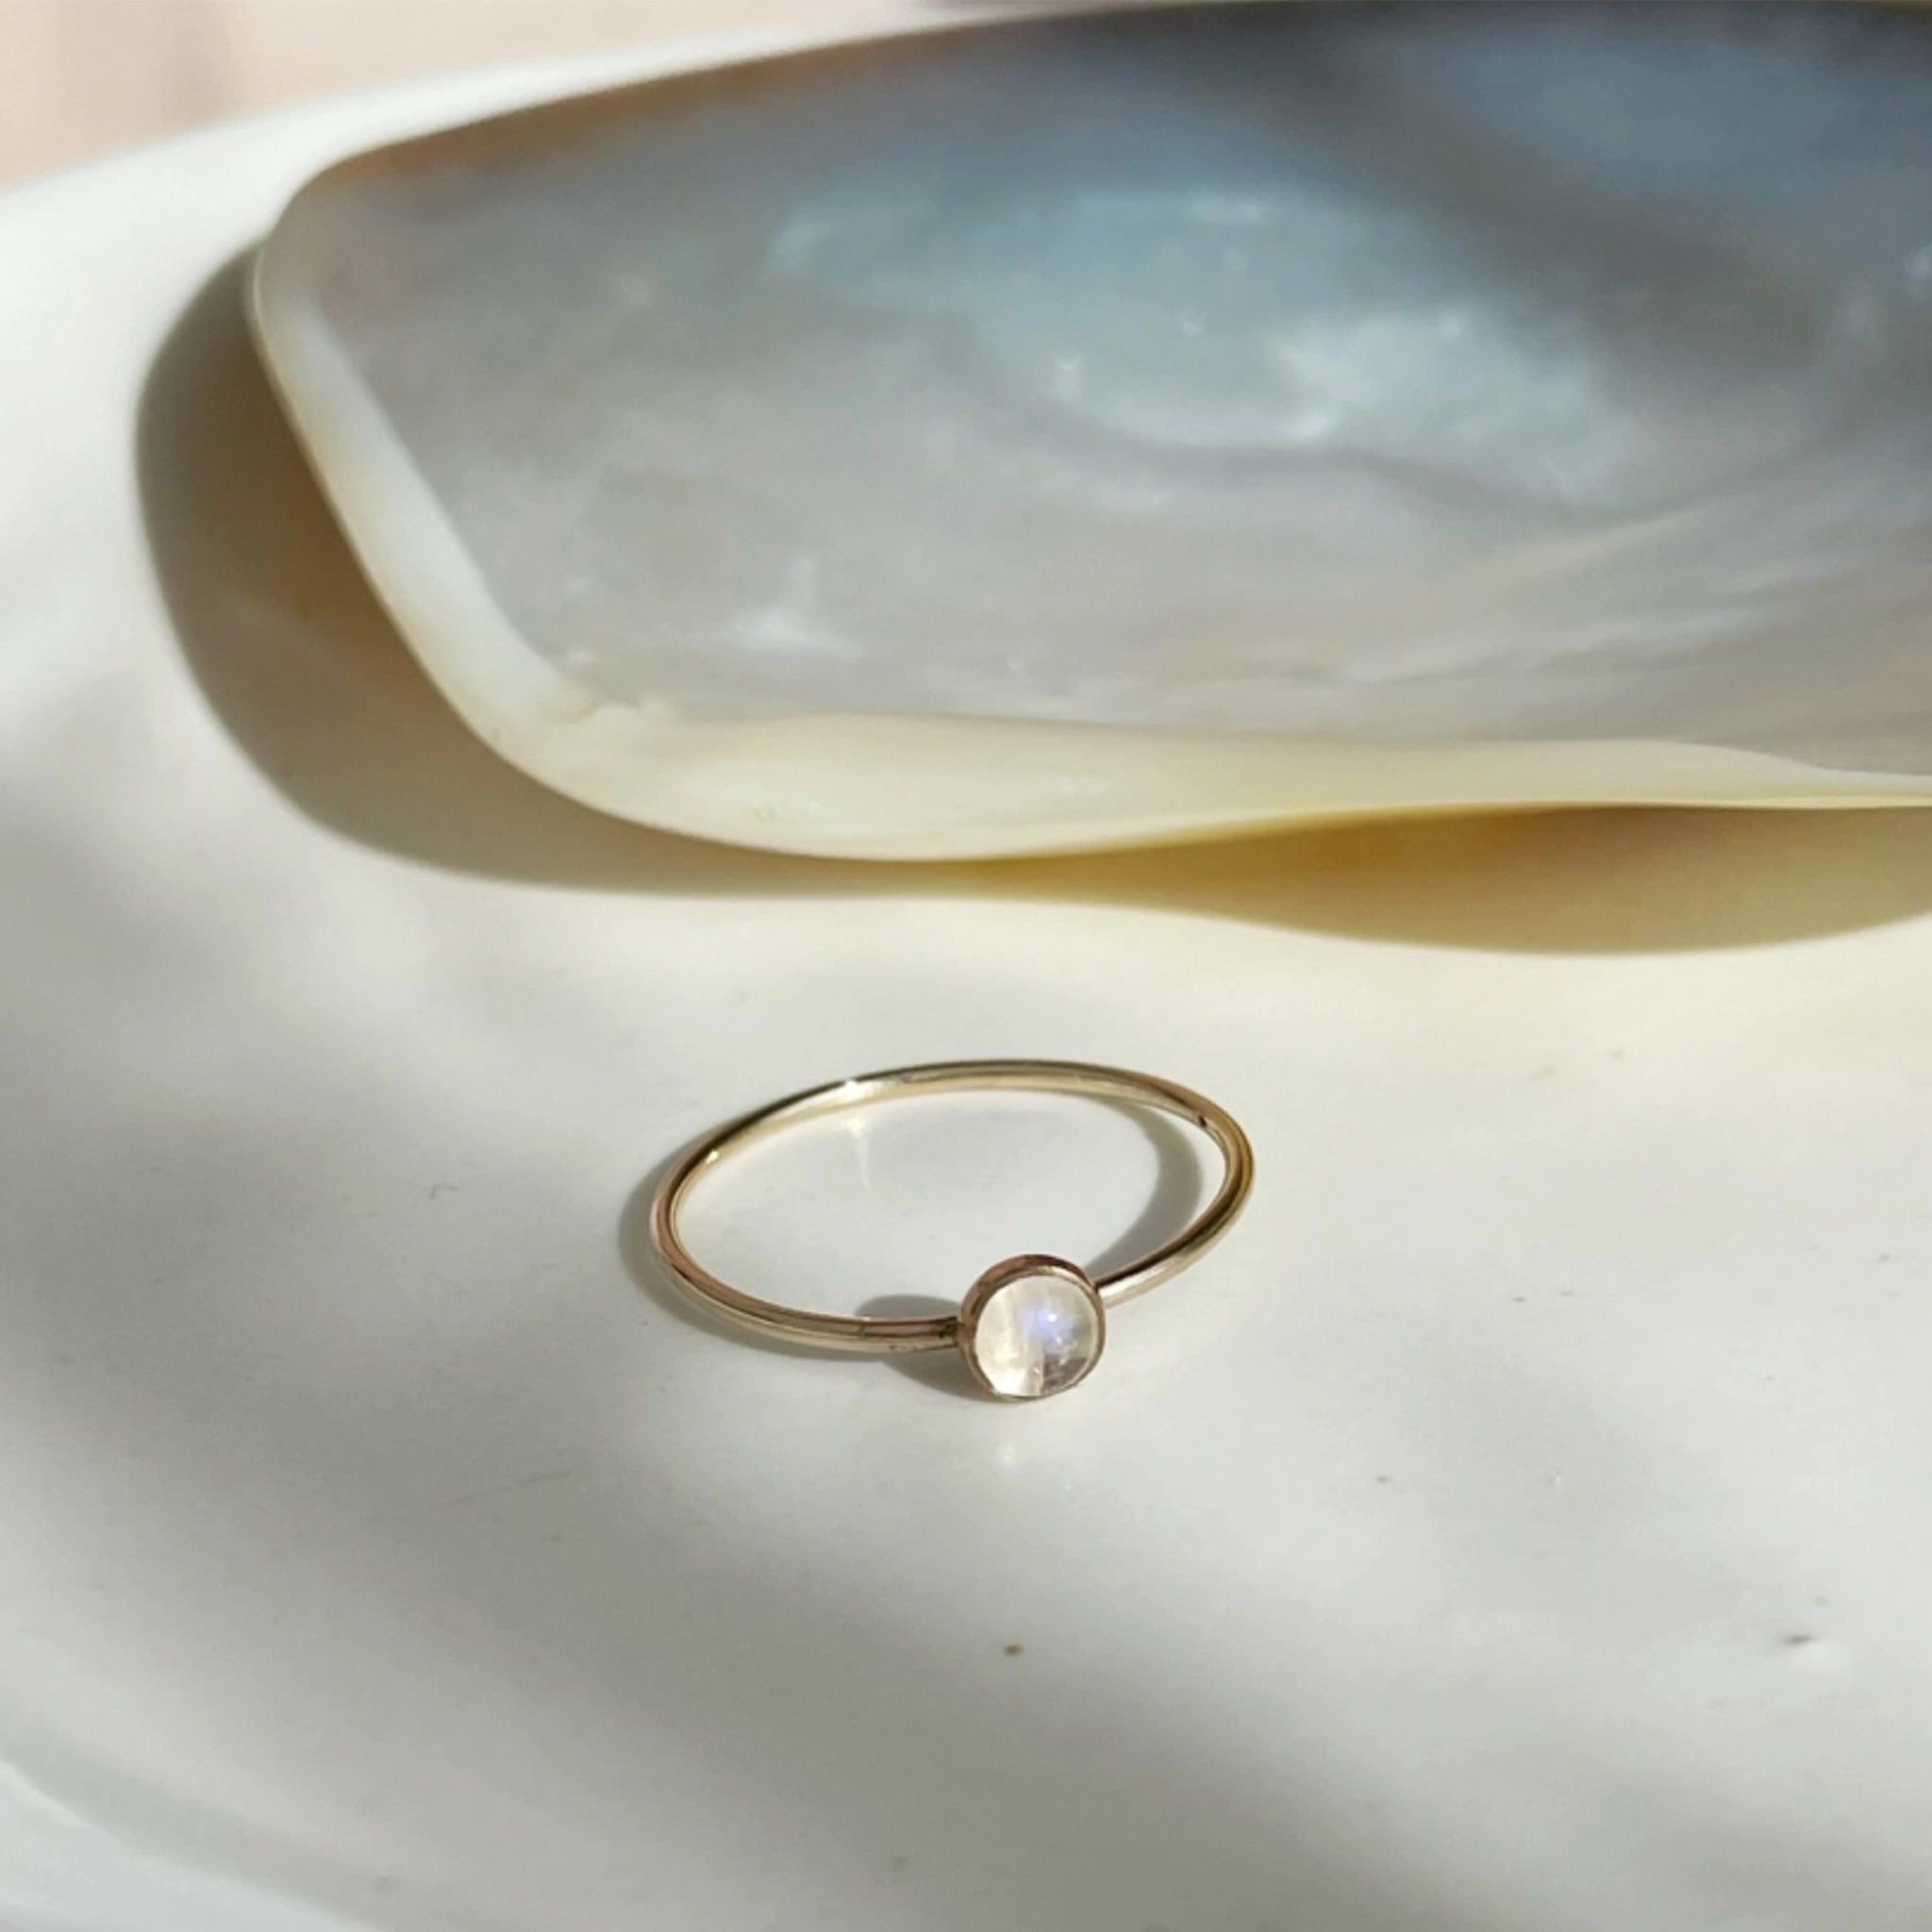 A gold thin ring with a moonstone in the center. 